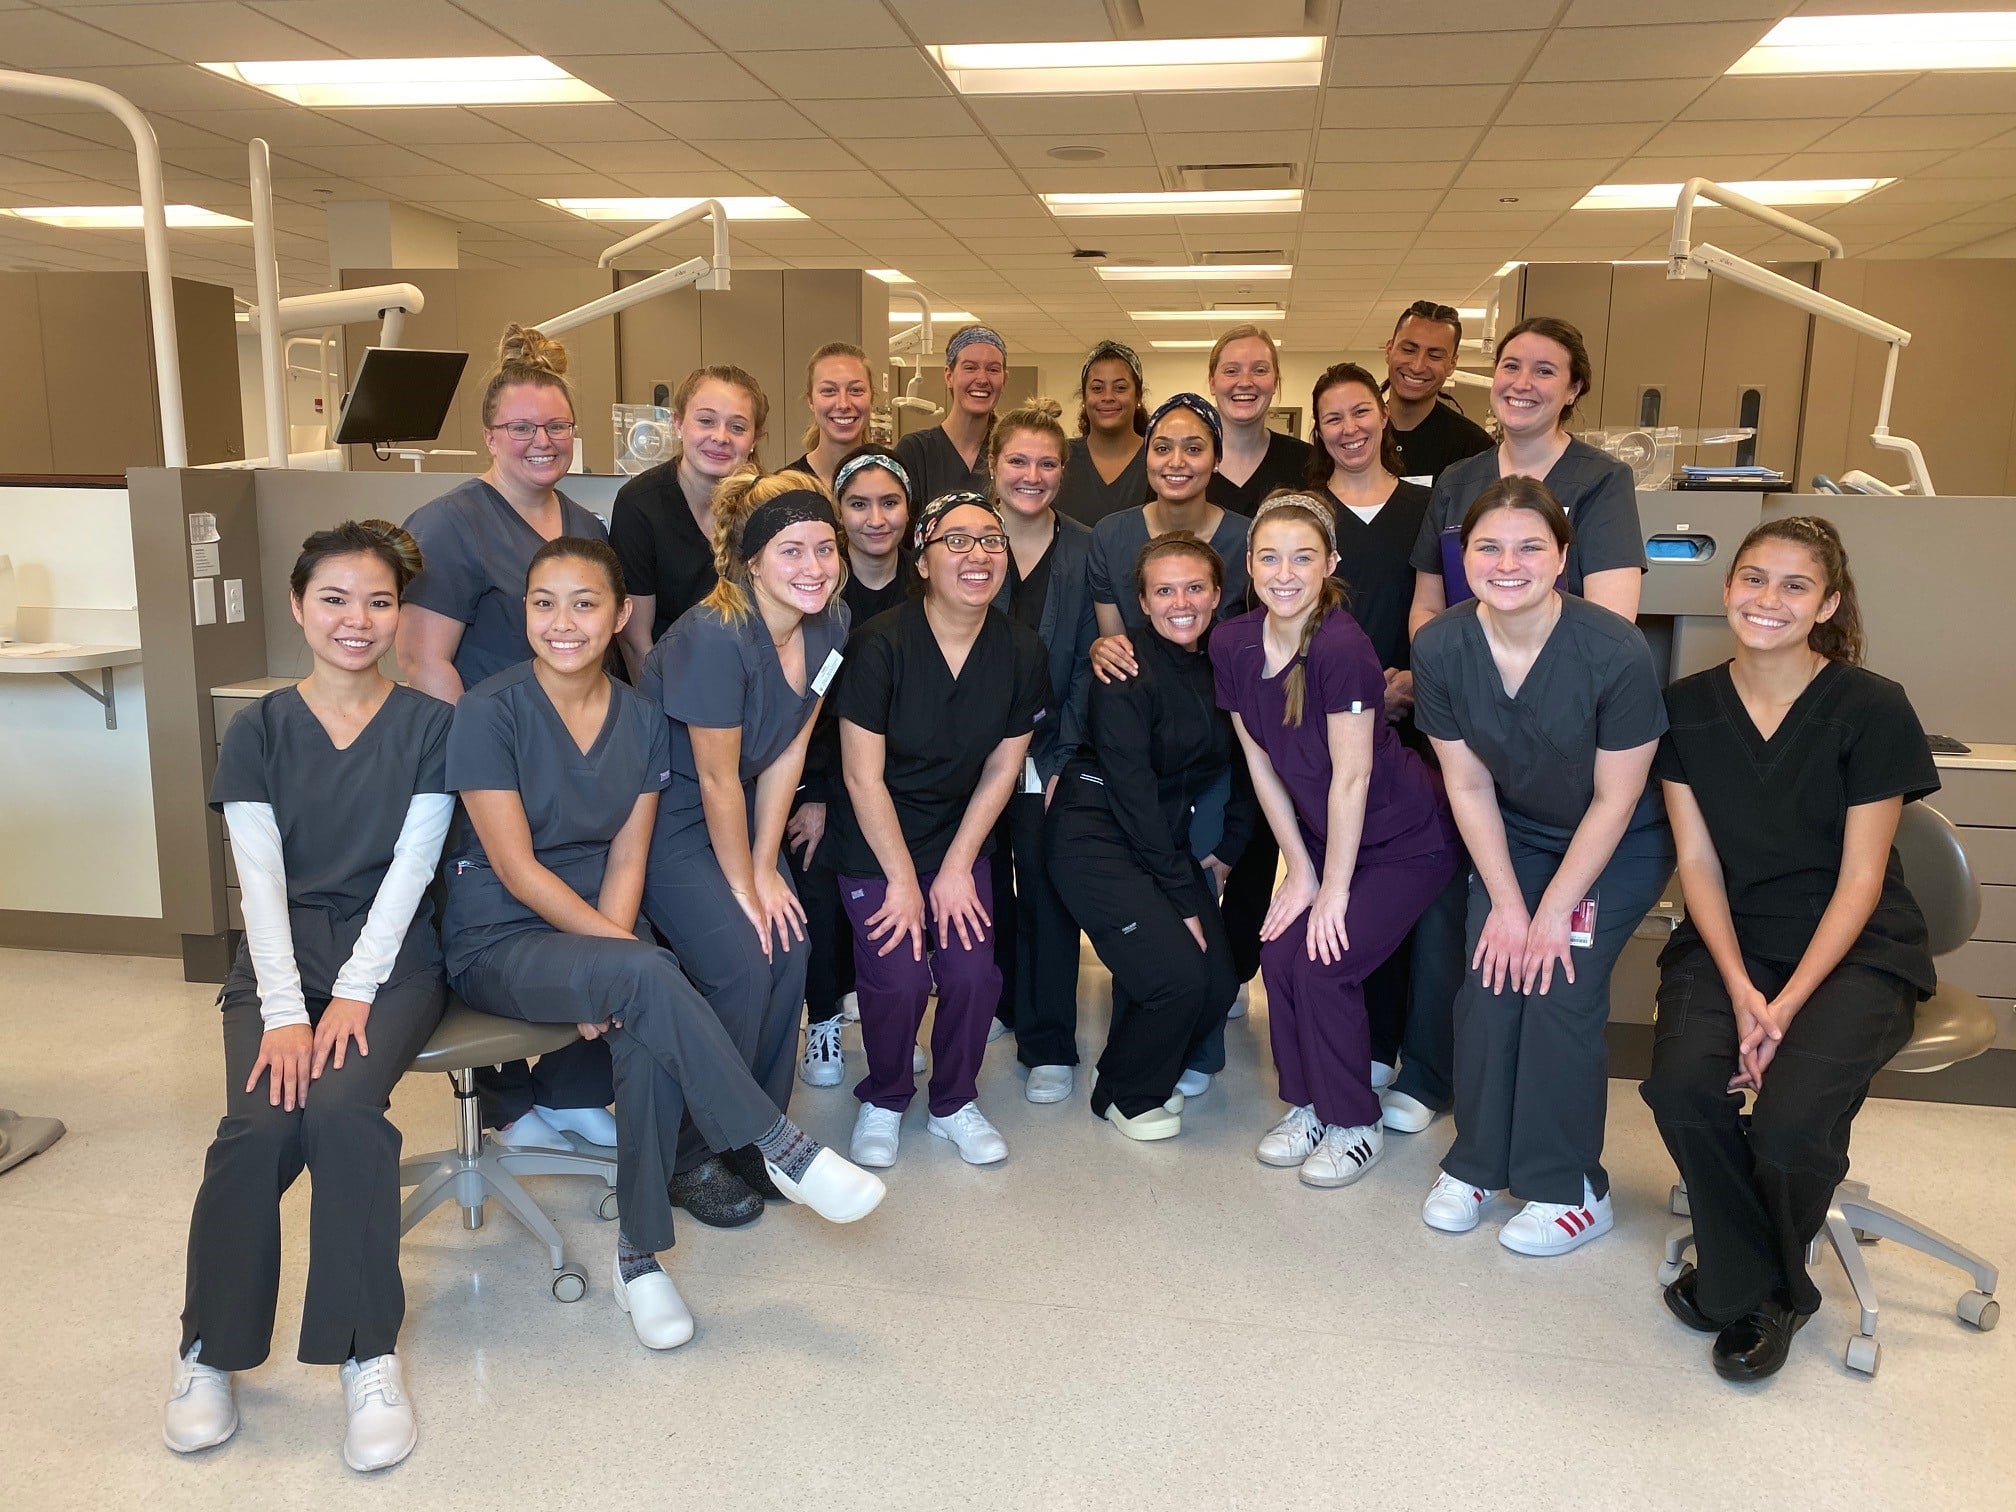 20212022 Iu South Bend Dental Hygiene Application Cycle Information Degree Programs Dental Education Vera Z Dwyer College Of Health Sciences Indiana University South Bend